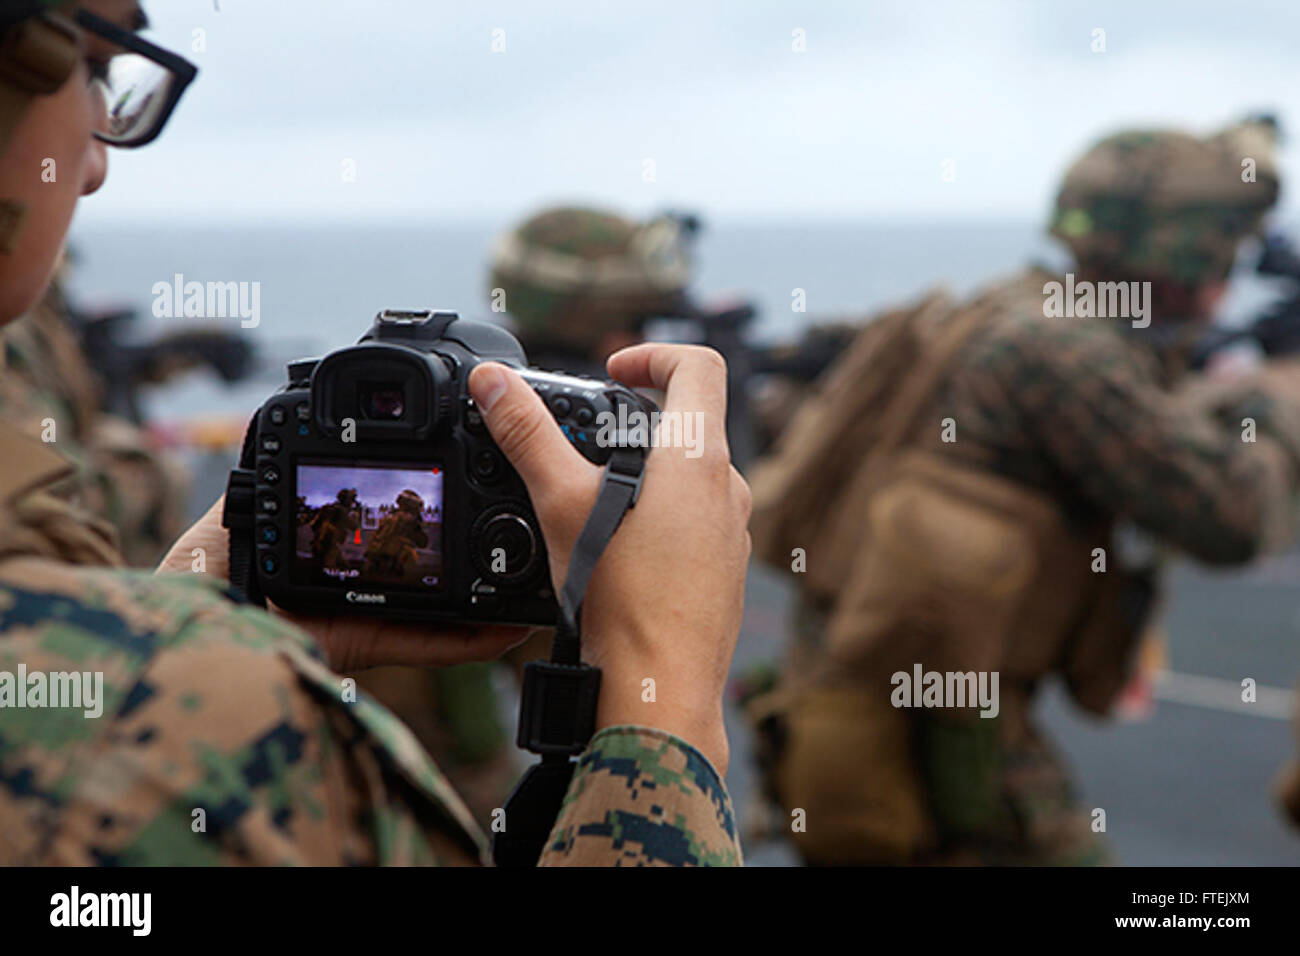 MEDITERRANEAN SEA (Jan. 4, 2015) Lance Cpl. Dani A. Zunun, a combat videographer assigned to 24th Marine Expeditionary Unit, captures video imagery during a live-fire exercise on the flight deck aboard USS Iwo Jima Jan. 4, 2015. The 24th MEU and Iwo Jima Amphibious Ready Group are conducting naval operations in the U.S. 6th Fleet area of operations in support of U.S. national security interests in Europe. Stock Photo